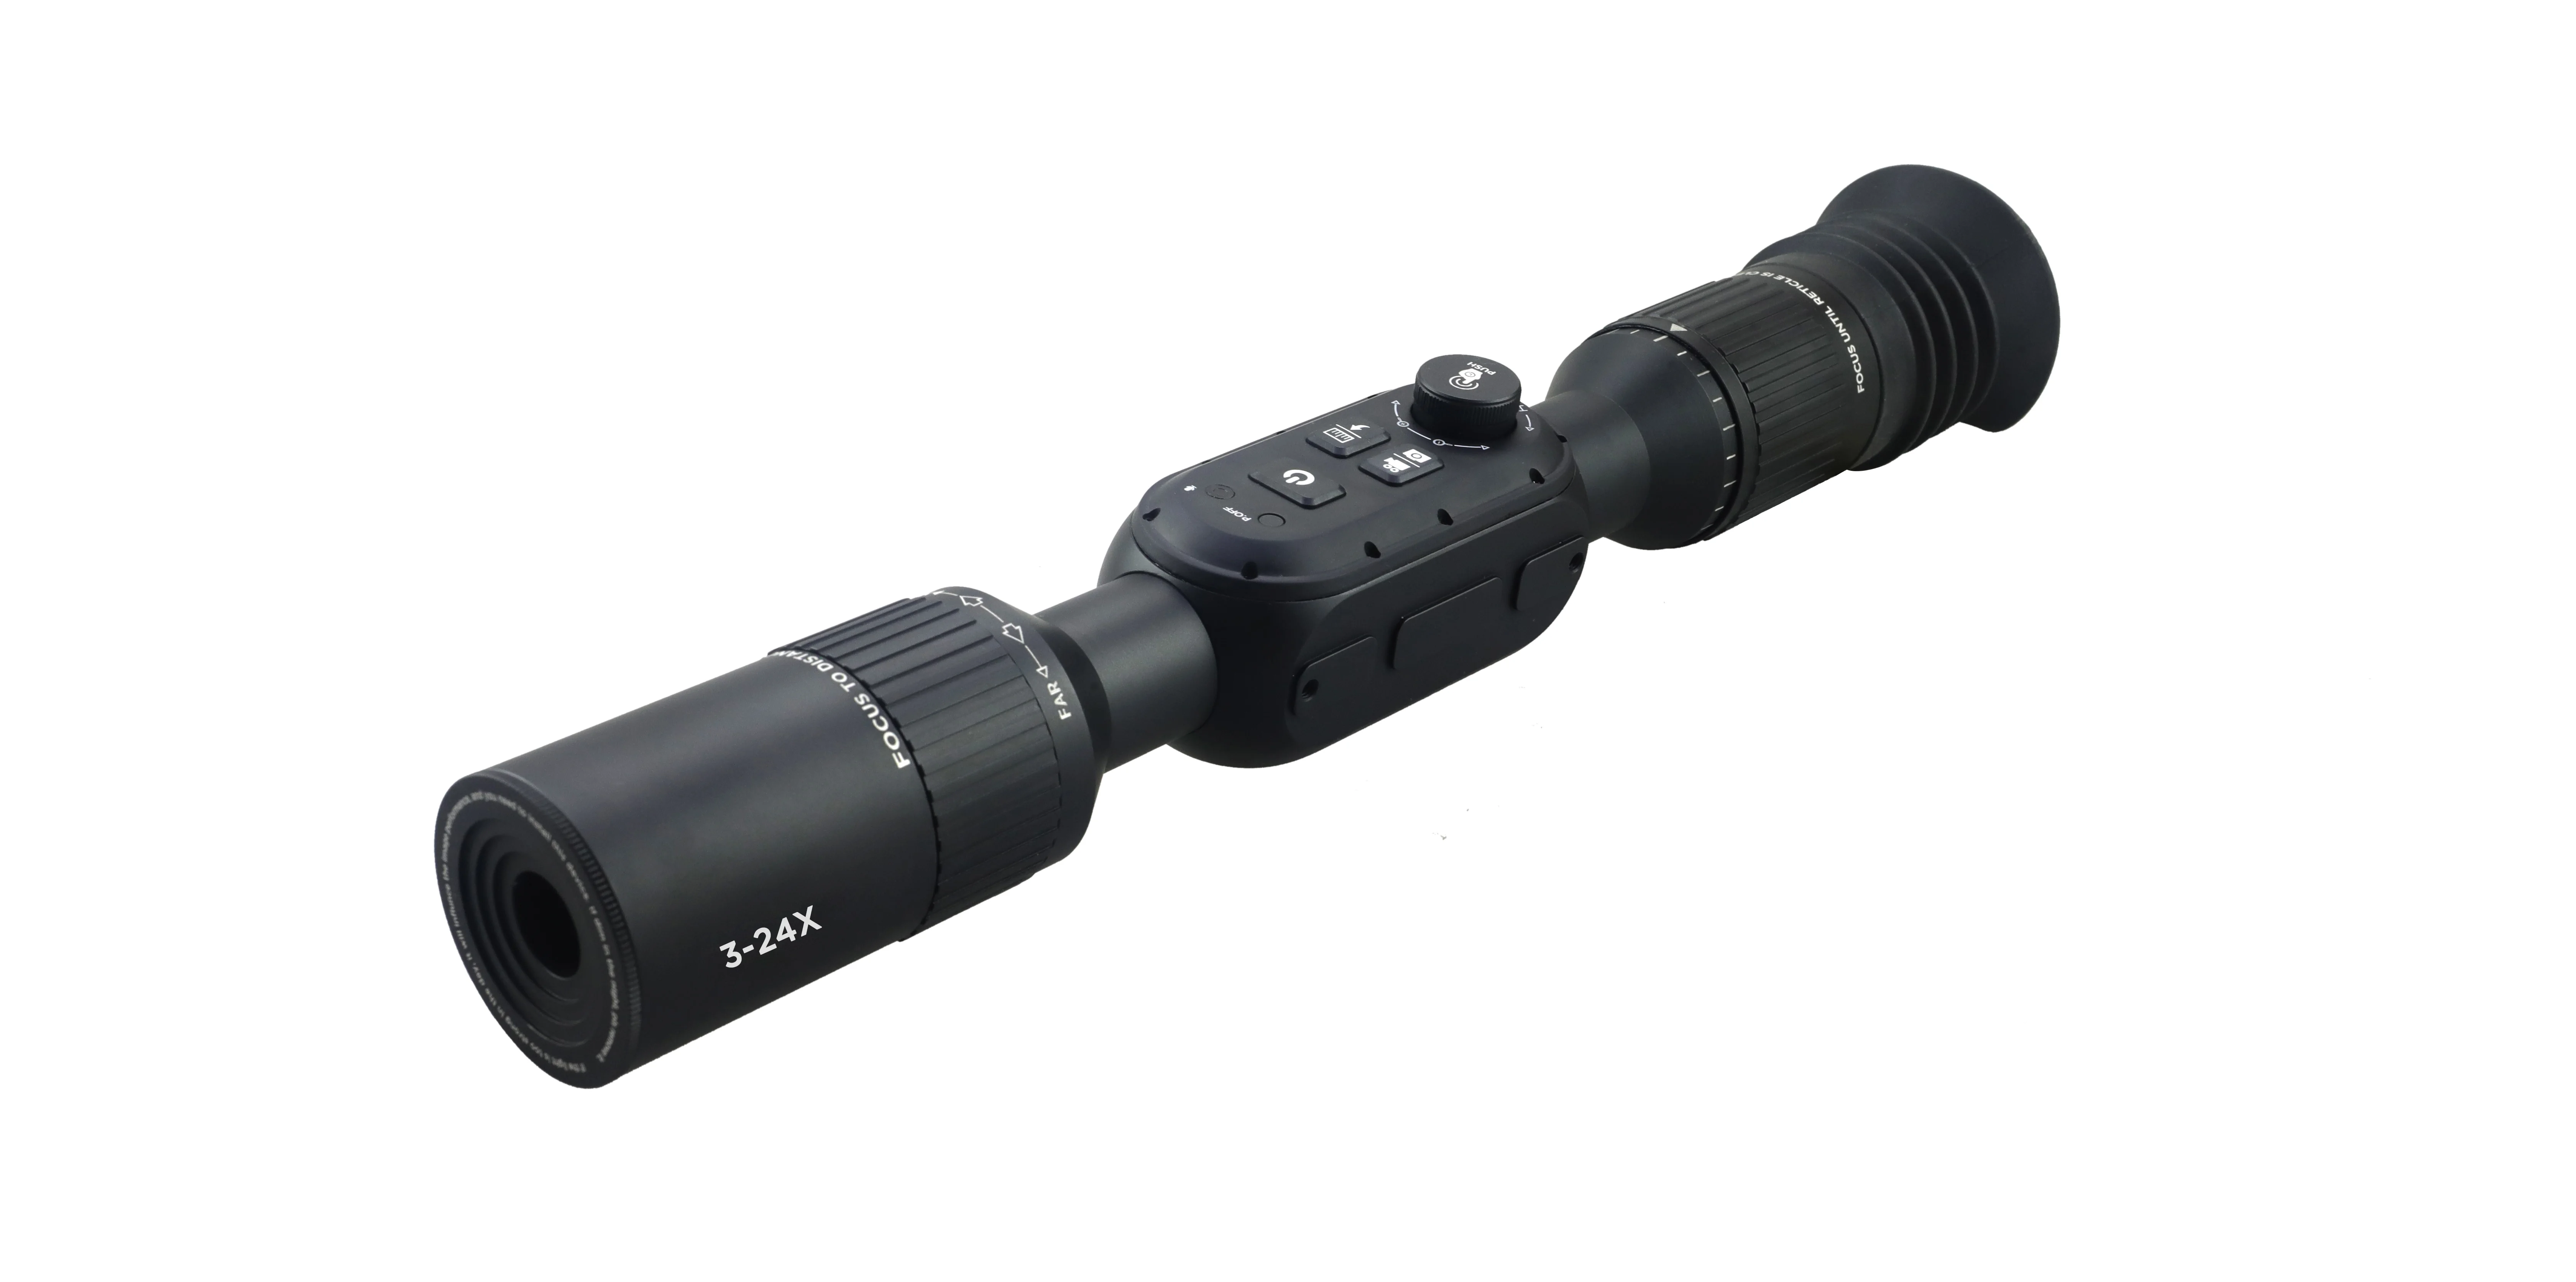 4K 3-24X High quality hunting equipment optical scope infrared night vision scope